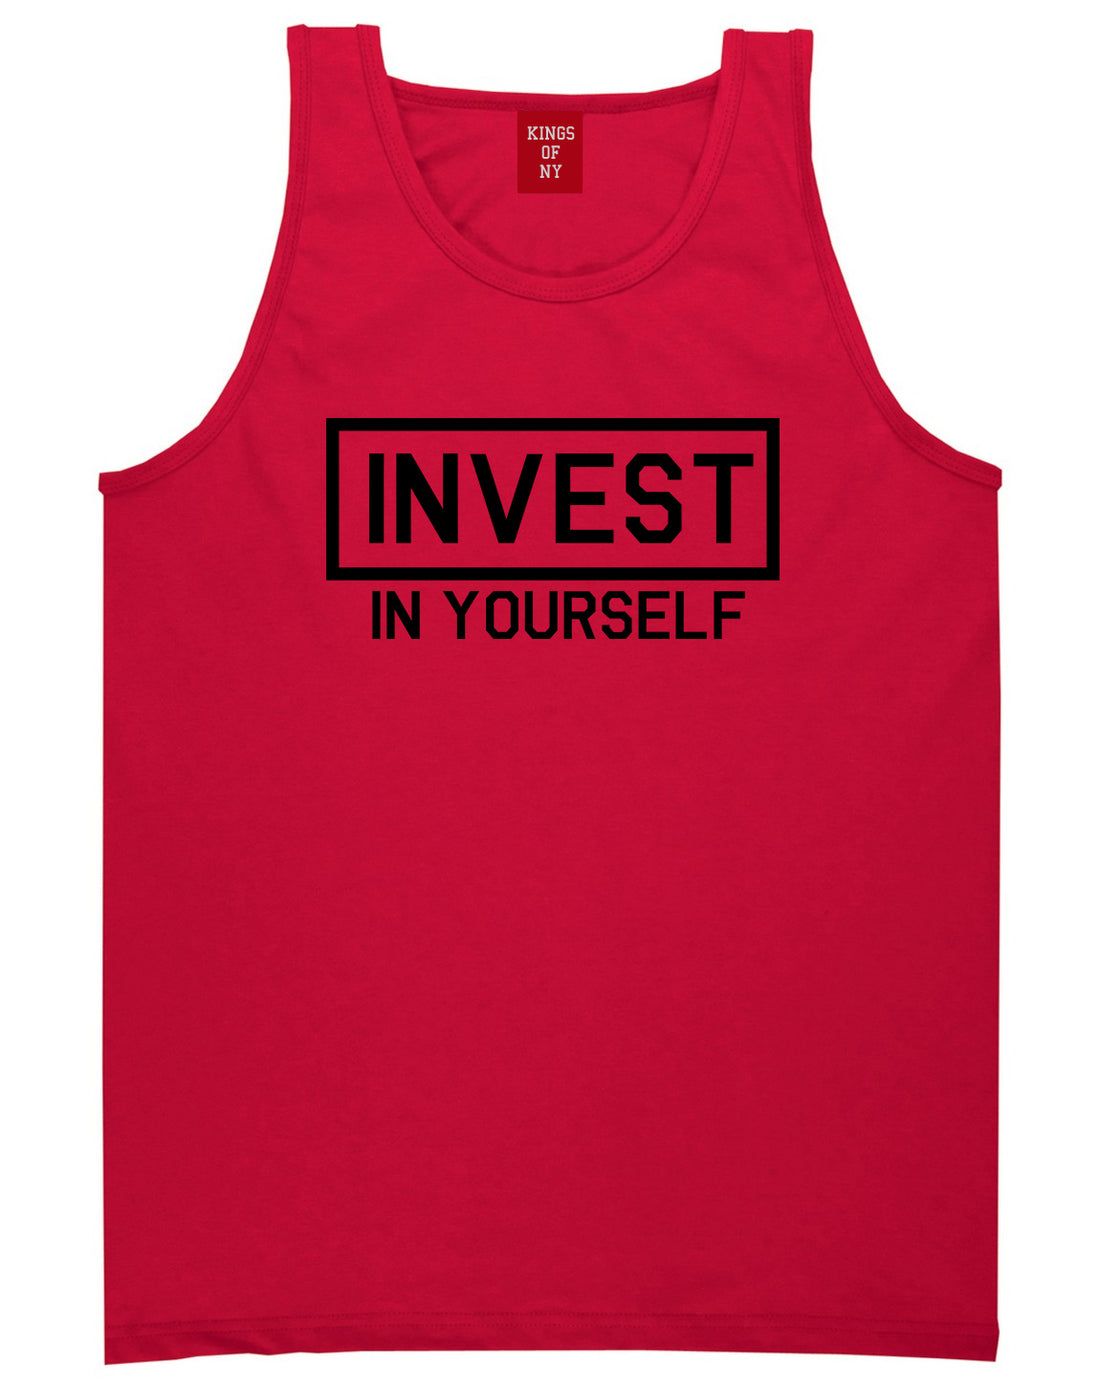 Invest In Yourself Mens Tank Top T-Shirt Red